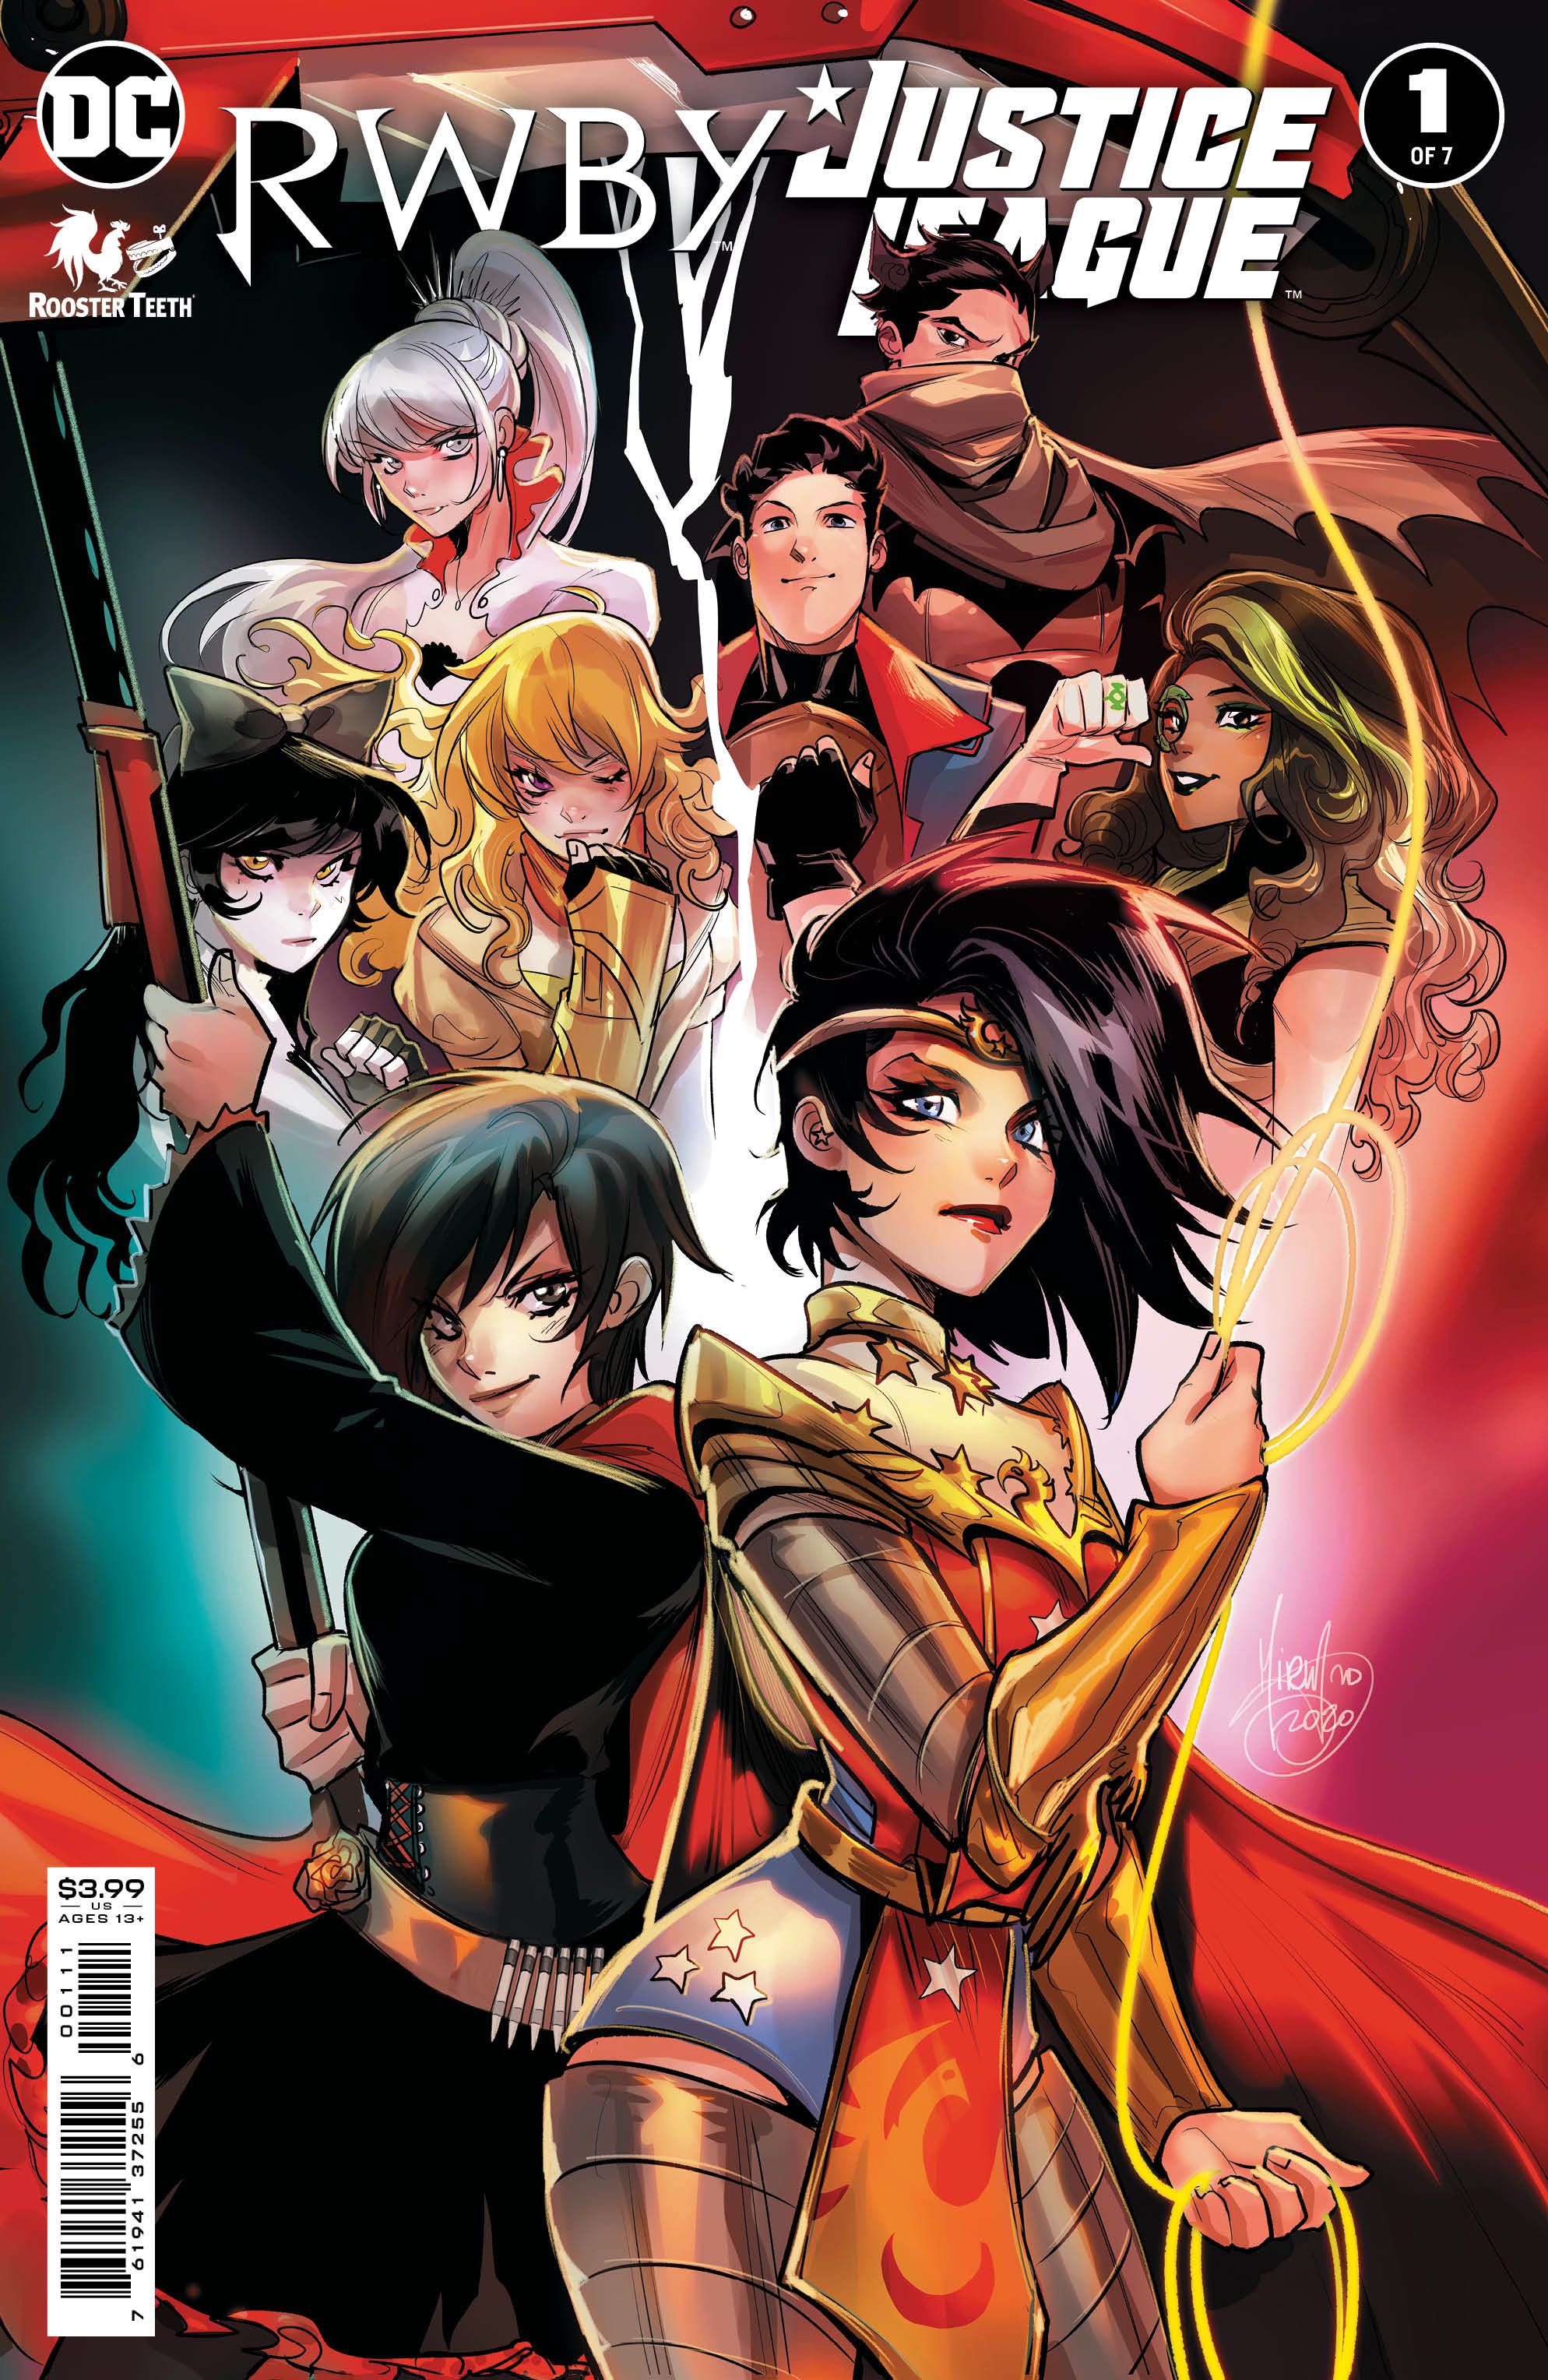 RWBY Justice League #1 Full-Size Cover